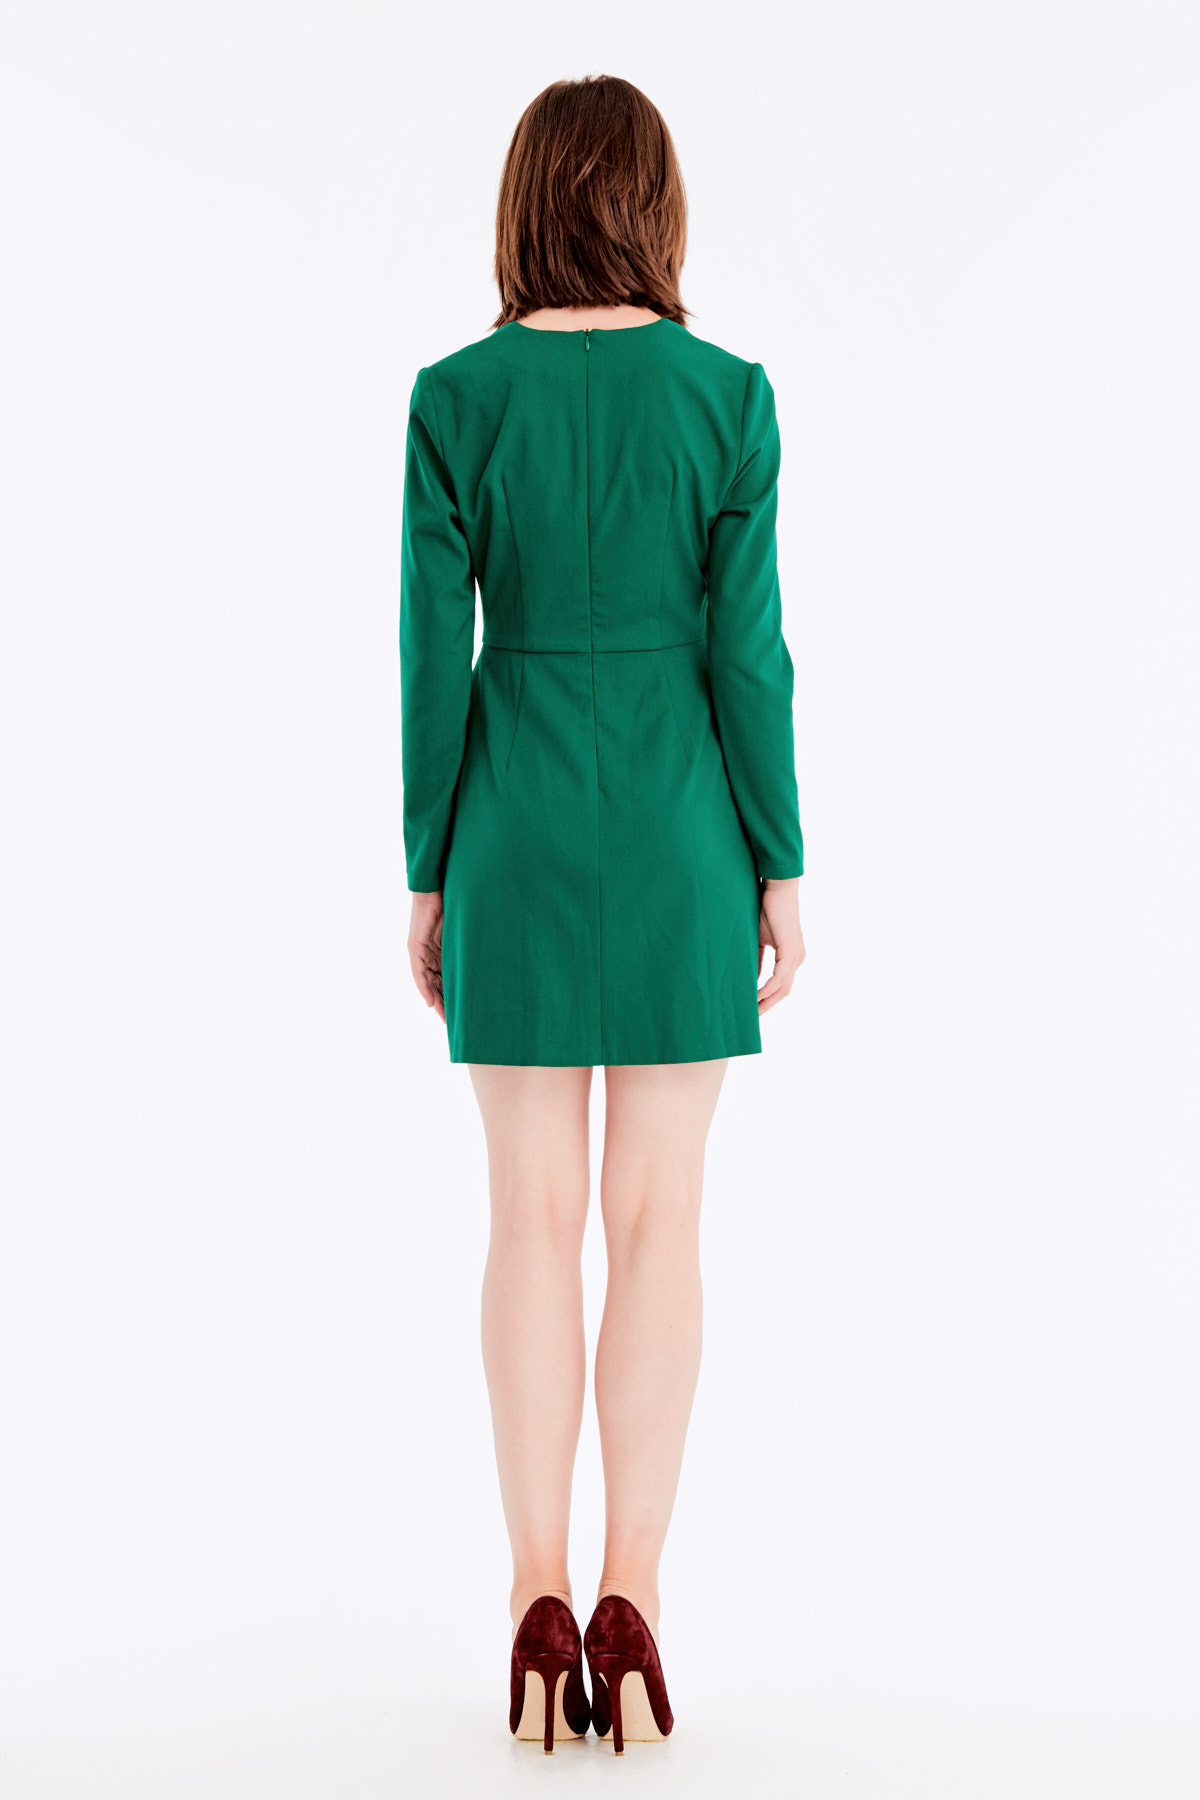 Wrap V-neck MustHave green dress , photo 7